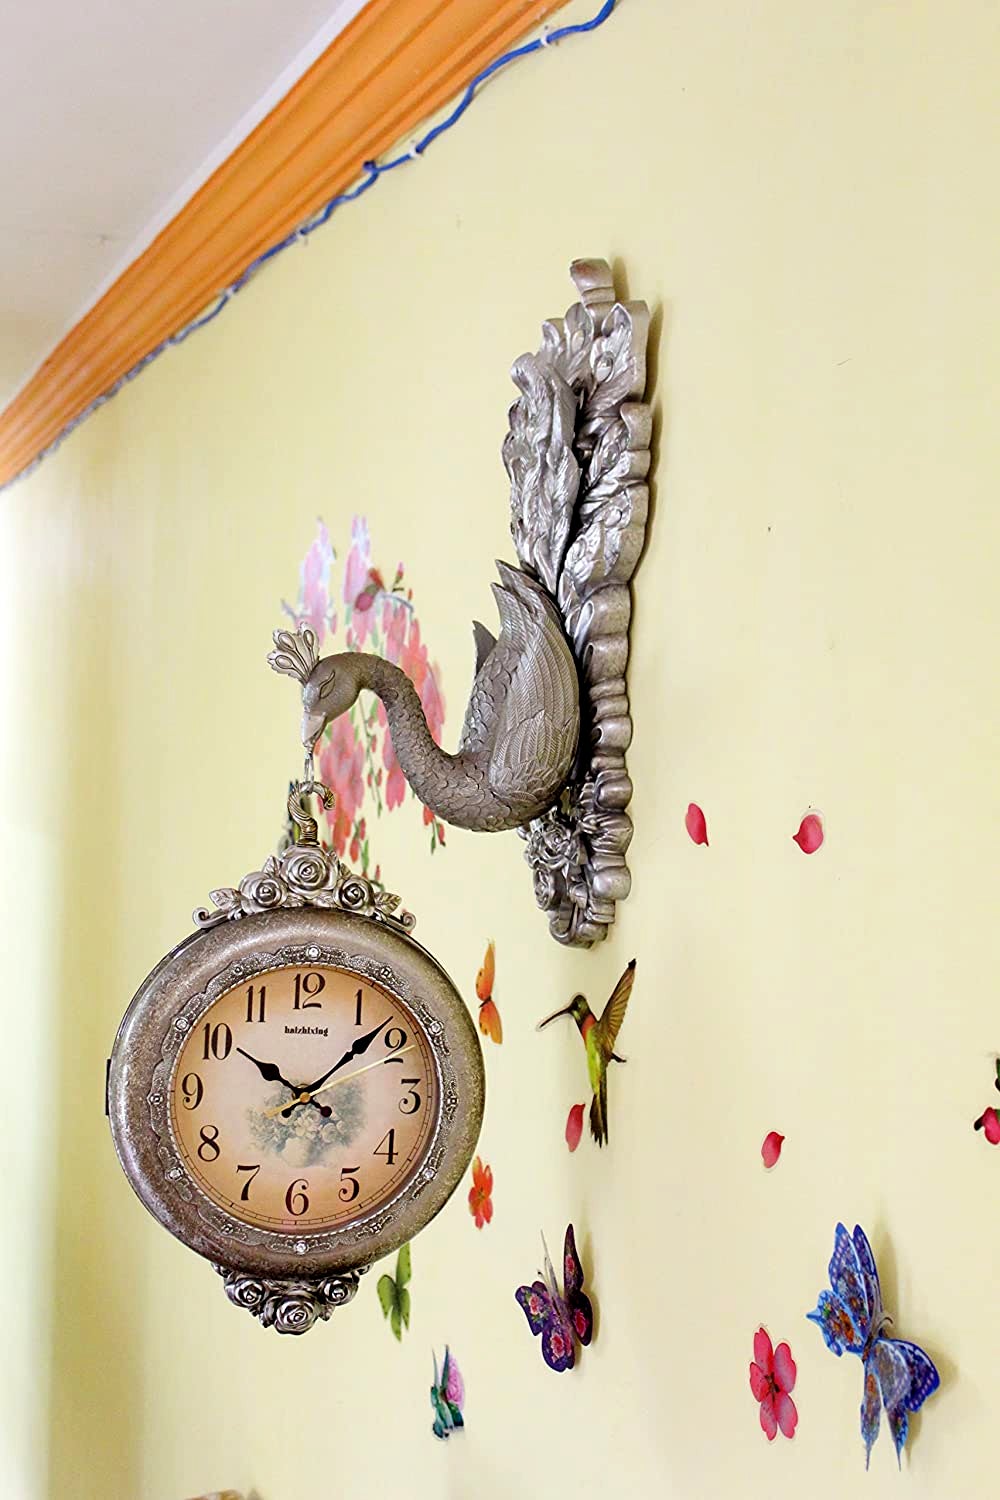 FunkyTradition Royal Silver Dual Hanging Peacock Wall Clock| Wall Watch | Wall Clock for Home Office Decor and Gifts 75 cm Tall